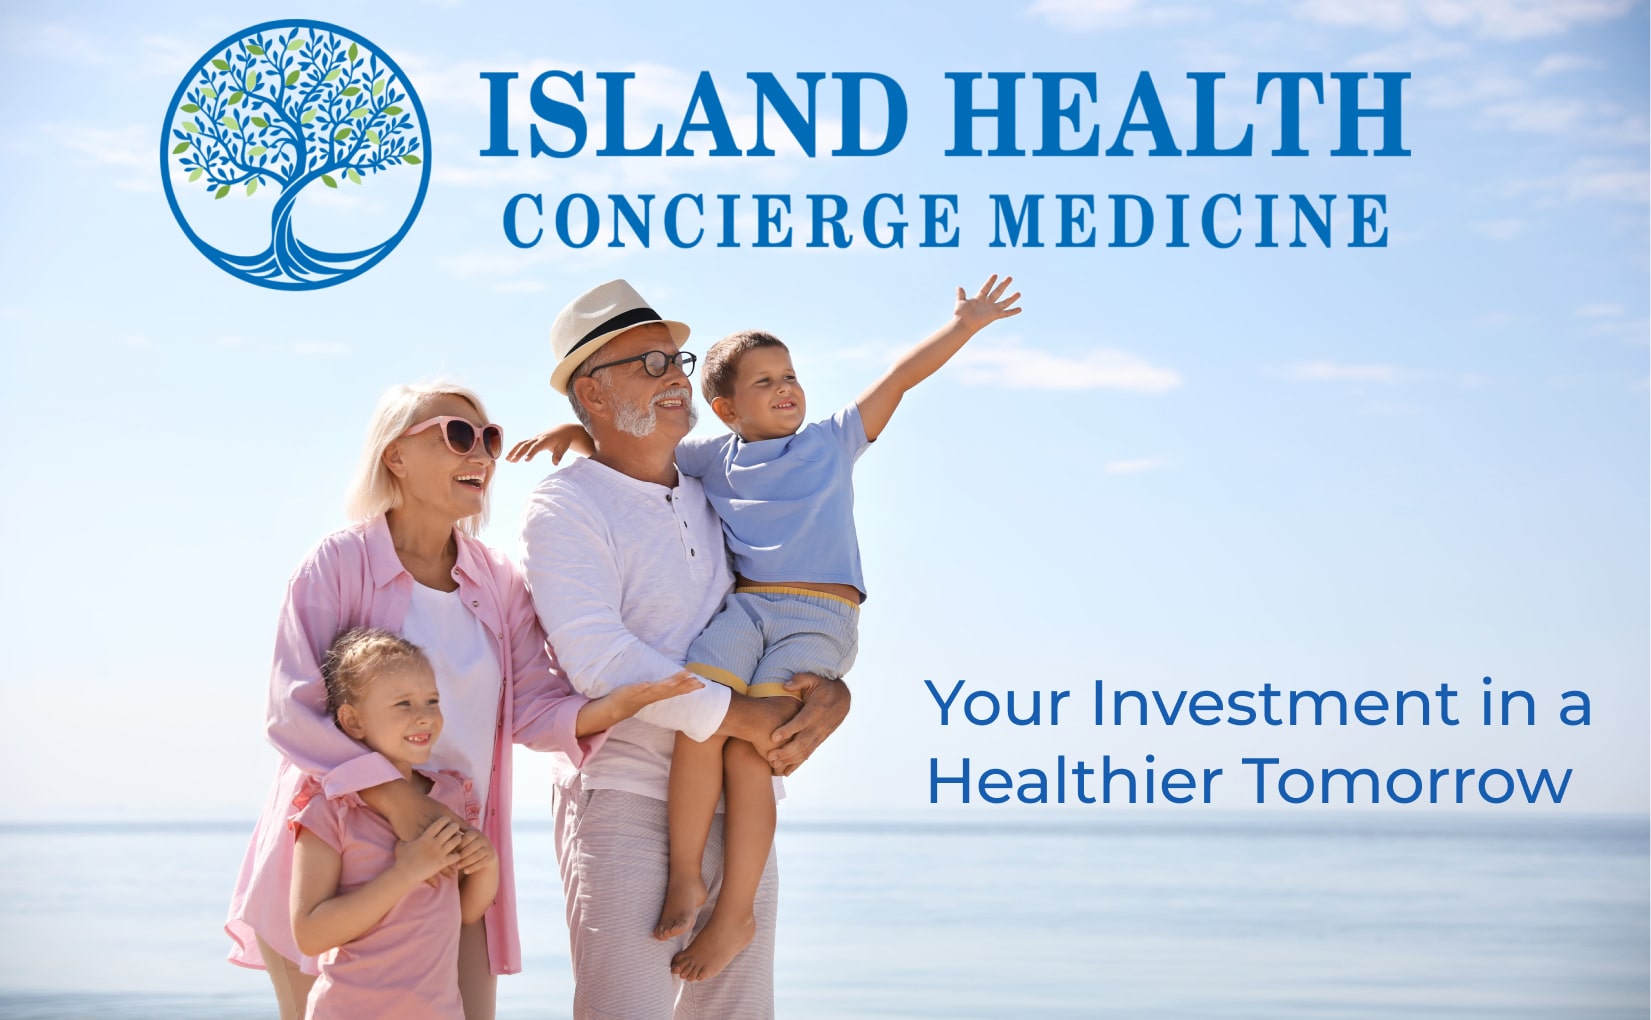 grandparents enjoying time at the beach with their grandchildren thanks to Island Health's concierge internal medicine care